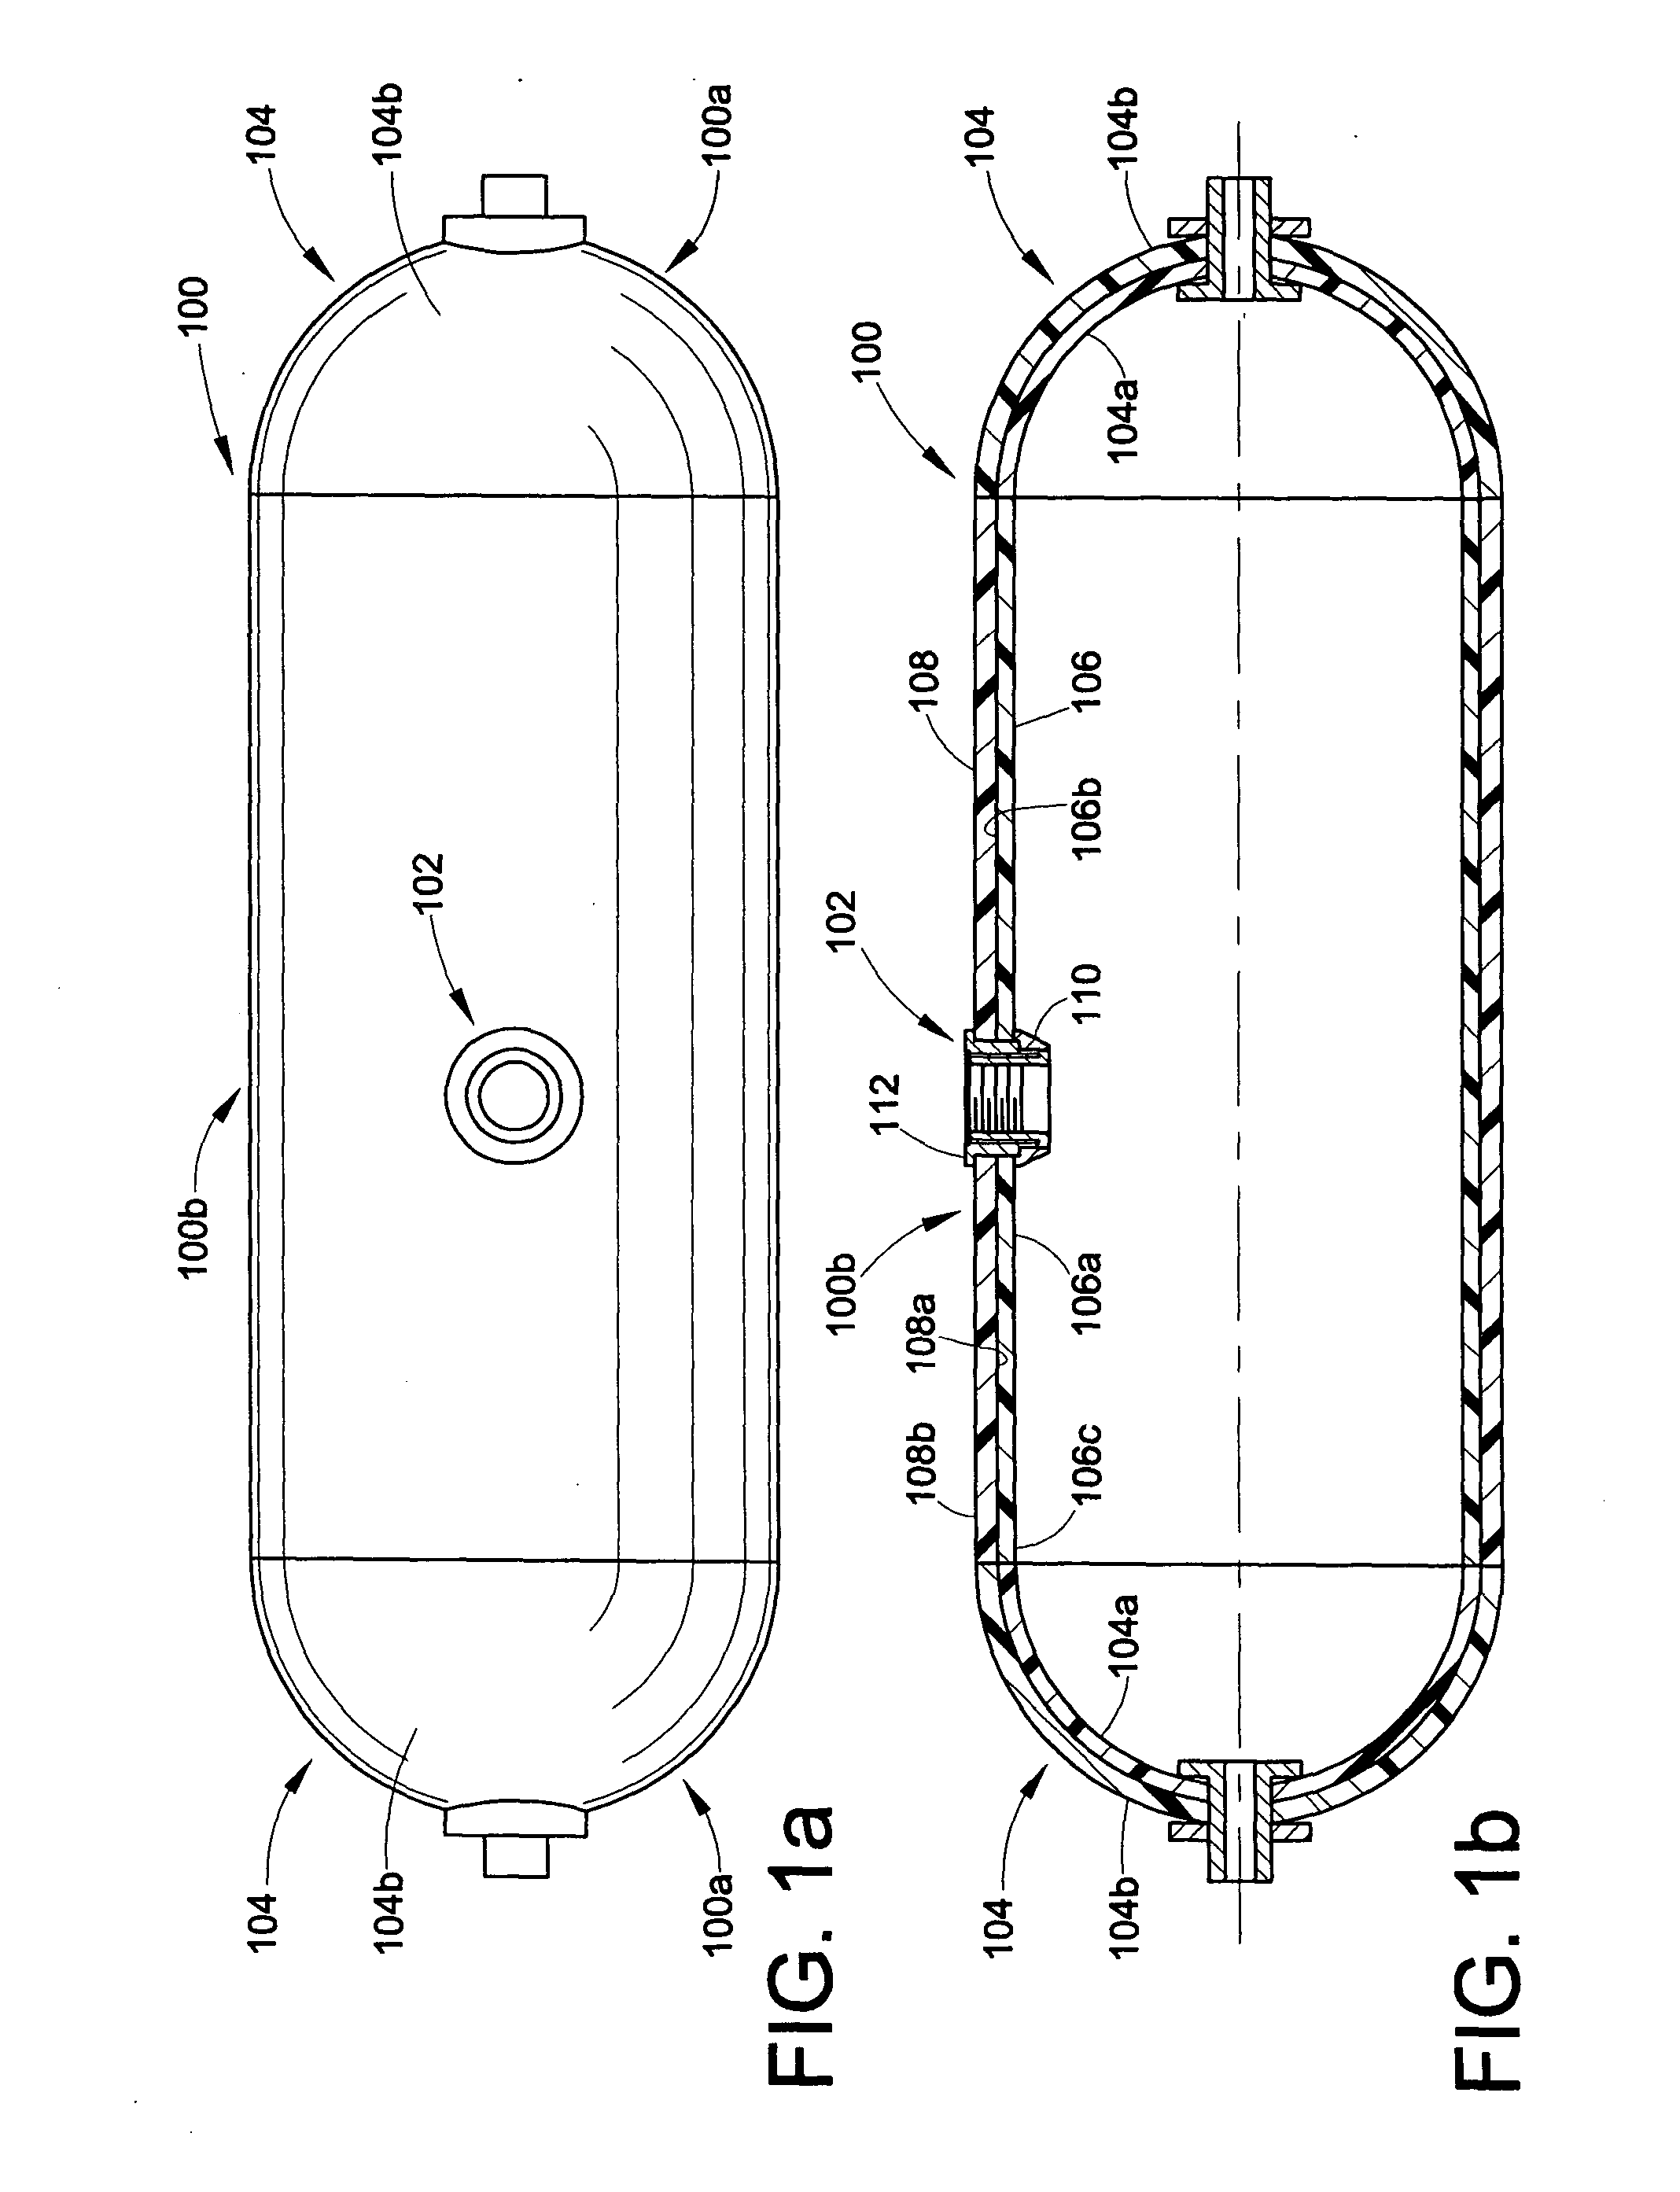 Filament-reinforced composite thermoplastic pressure vessel fitting assembly and method